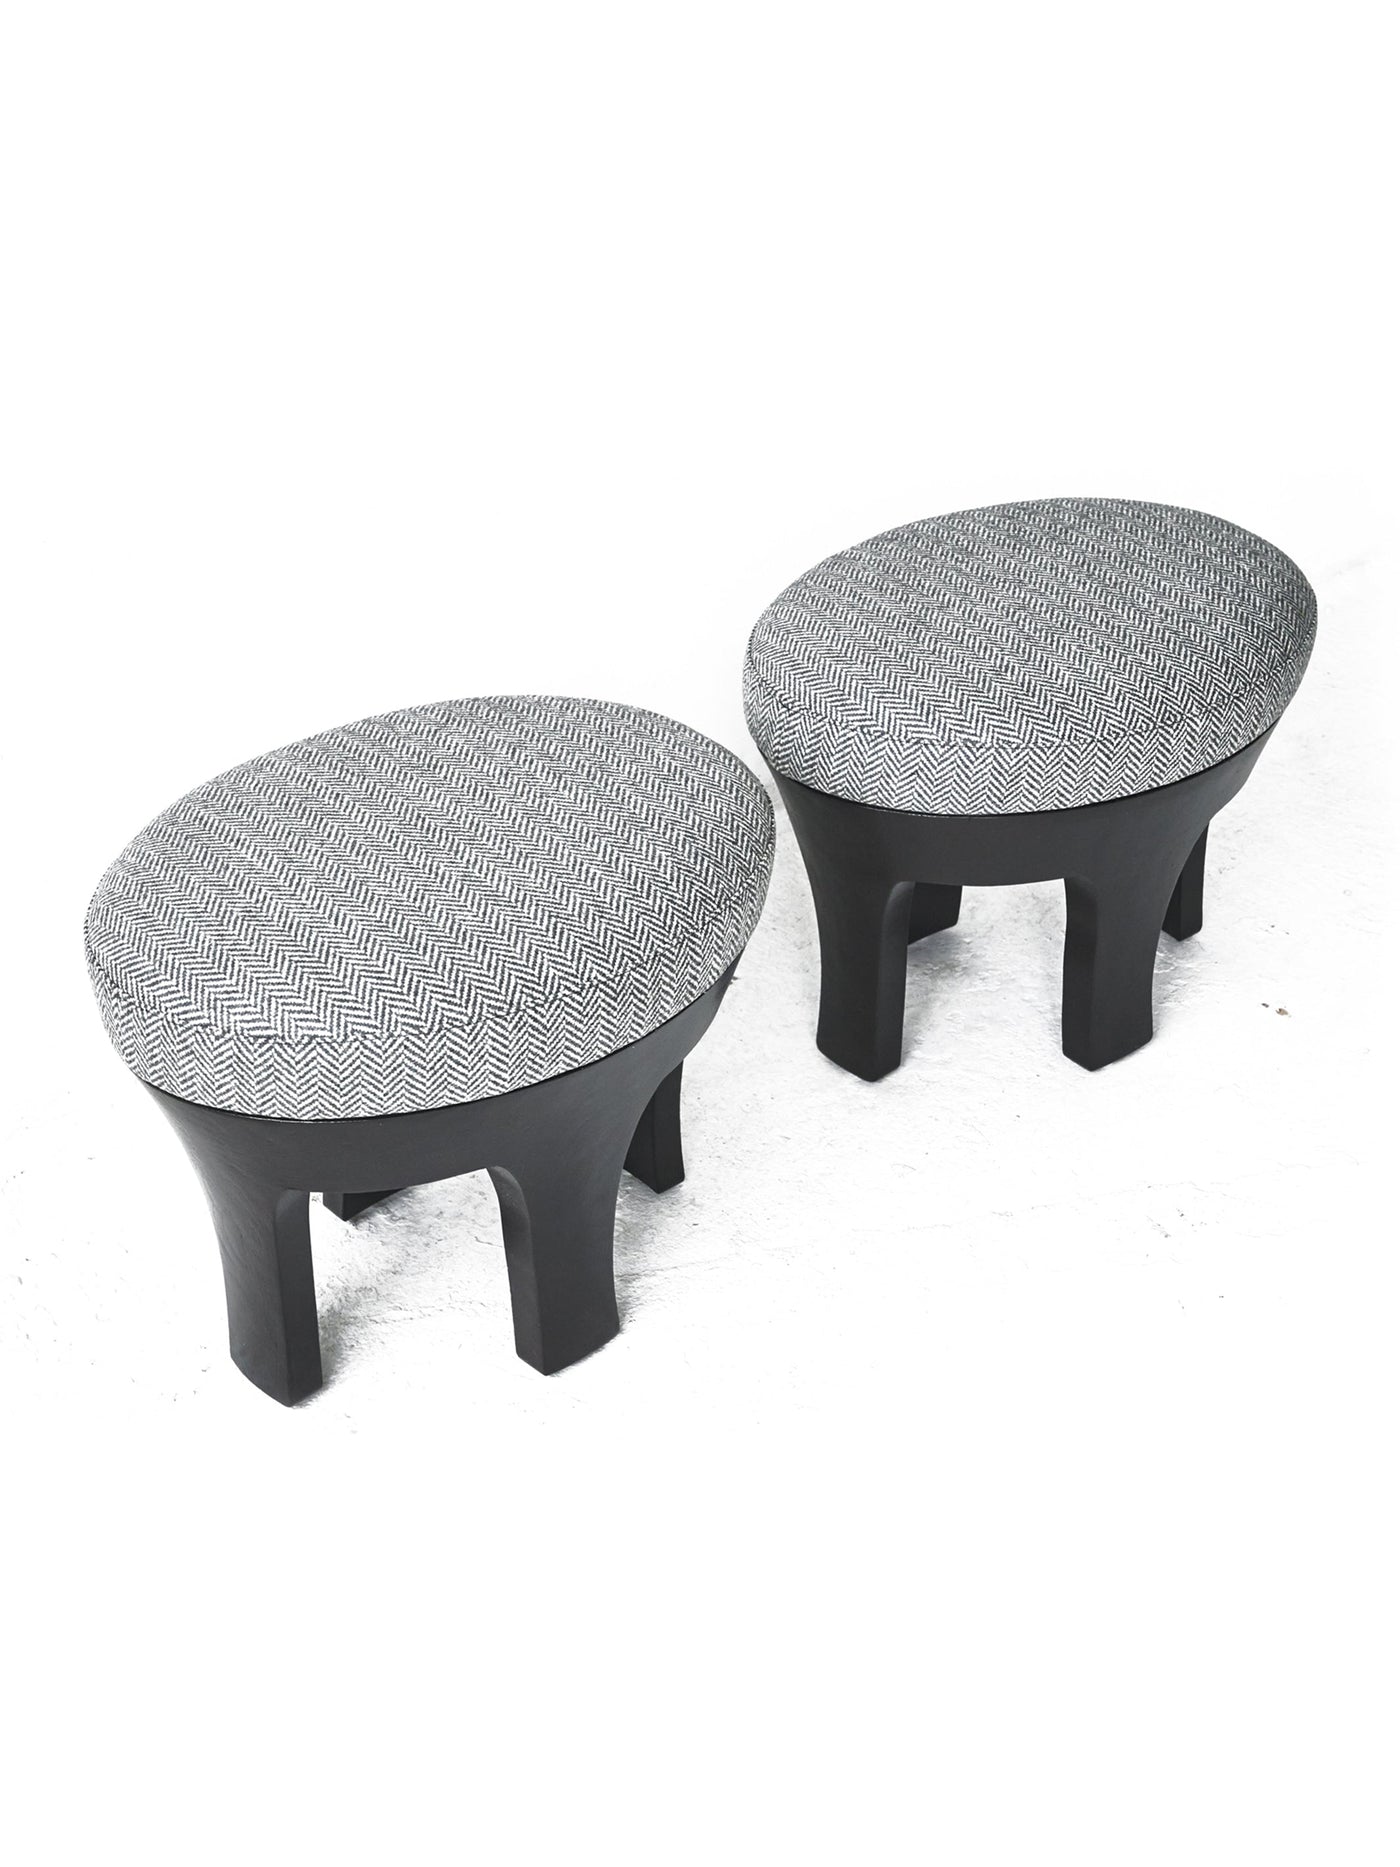 Pair of Ottomans in Grey Cashmere from The Upper House 